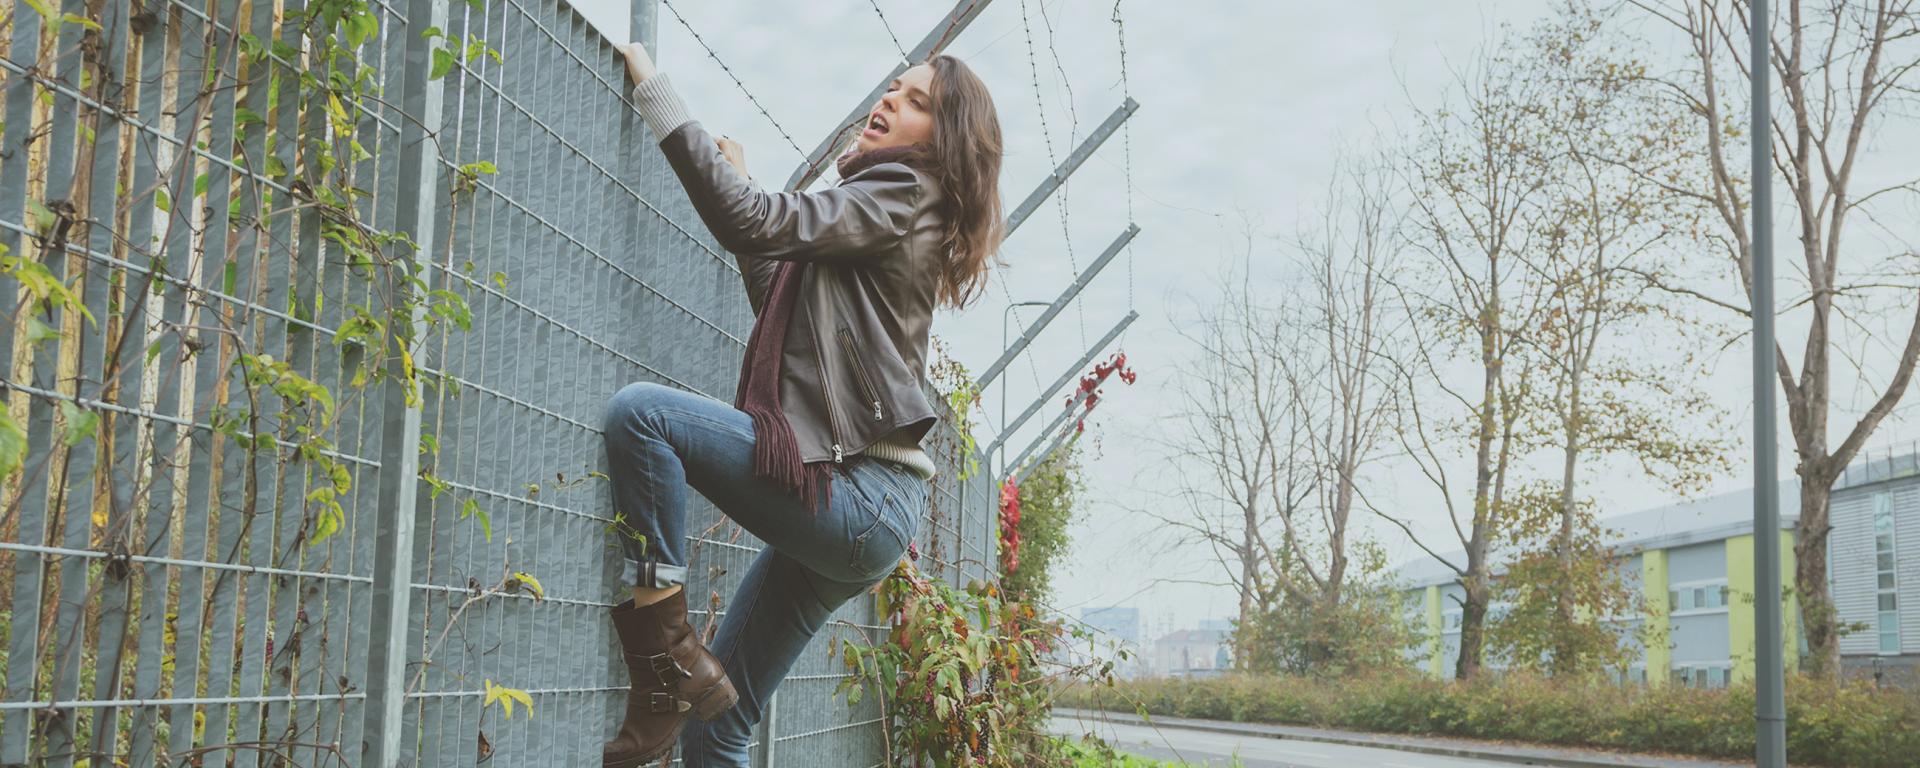 woman climbing on a fence